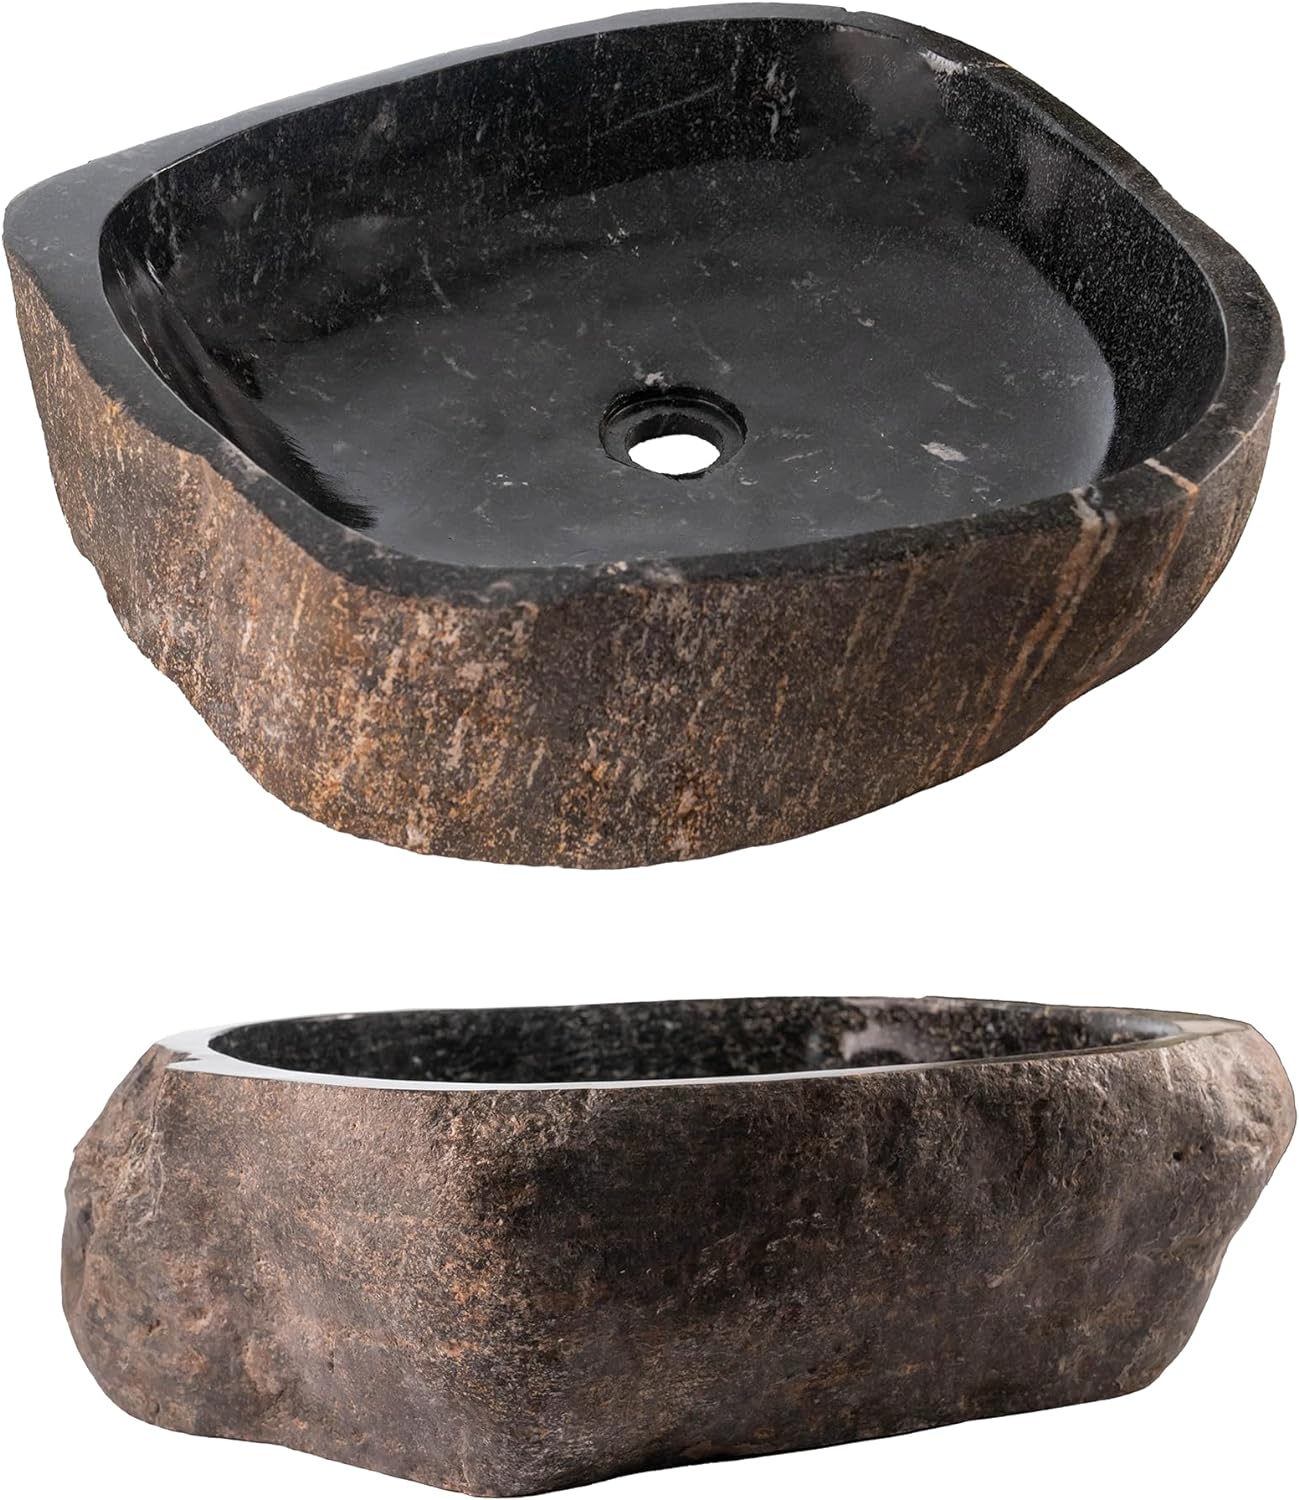 MIDUSO A+ Grade Irregular Natural River Stone Vessel Sink, Stone Vessel Sinks for Bathrooms, Vessel Sink Stone, Bathroom Vessel Sink Included Copper Pop-up Drain and P Trap Bathroom Sink